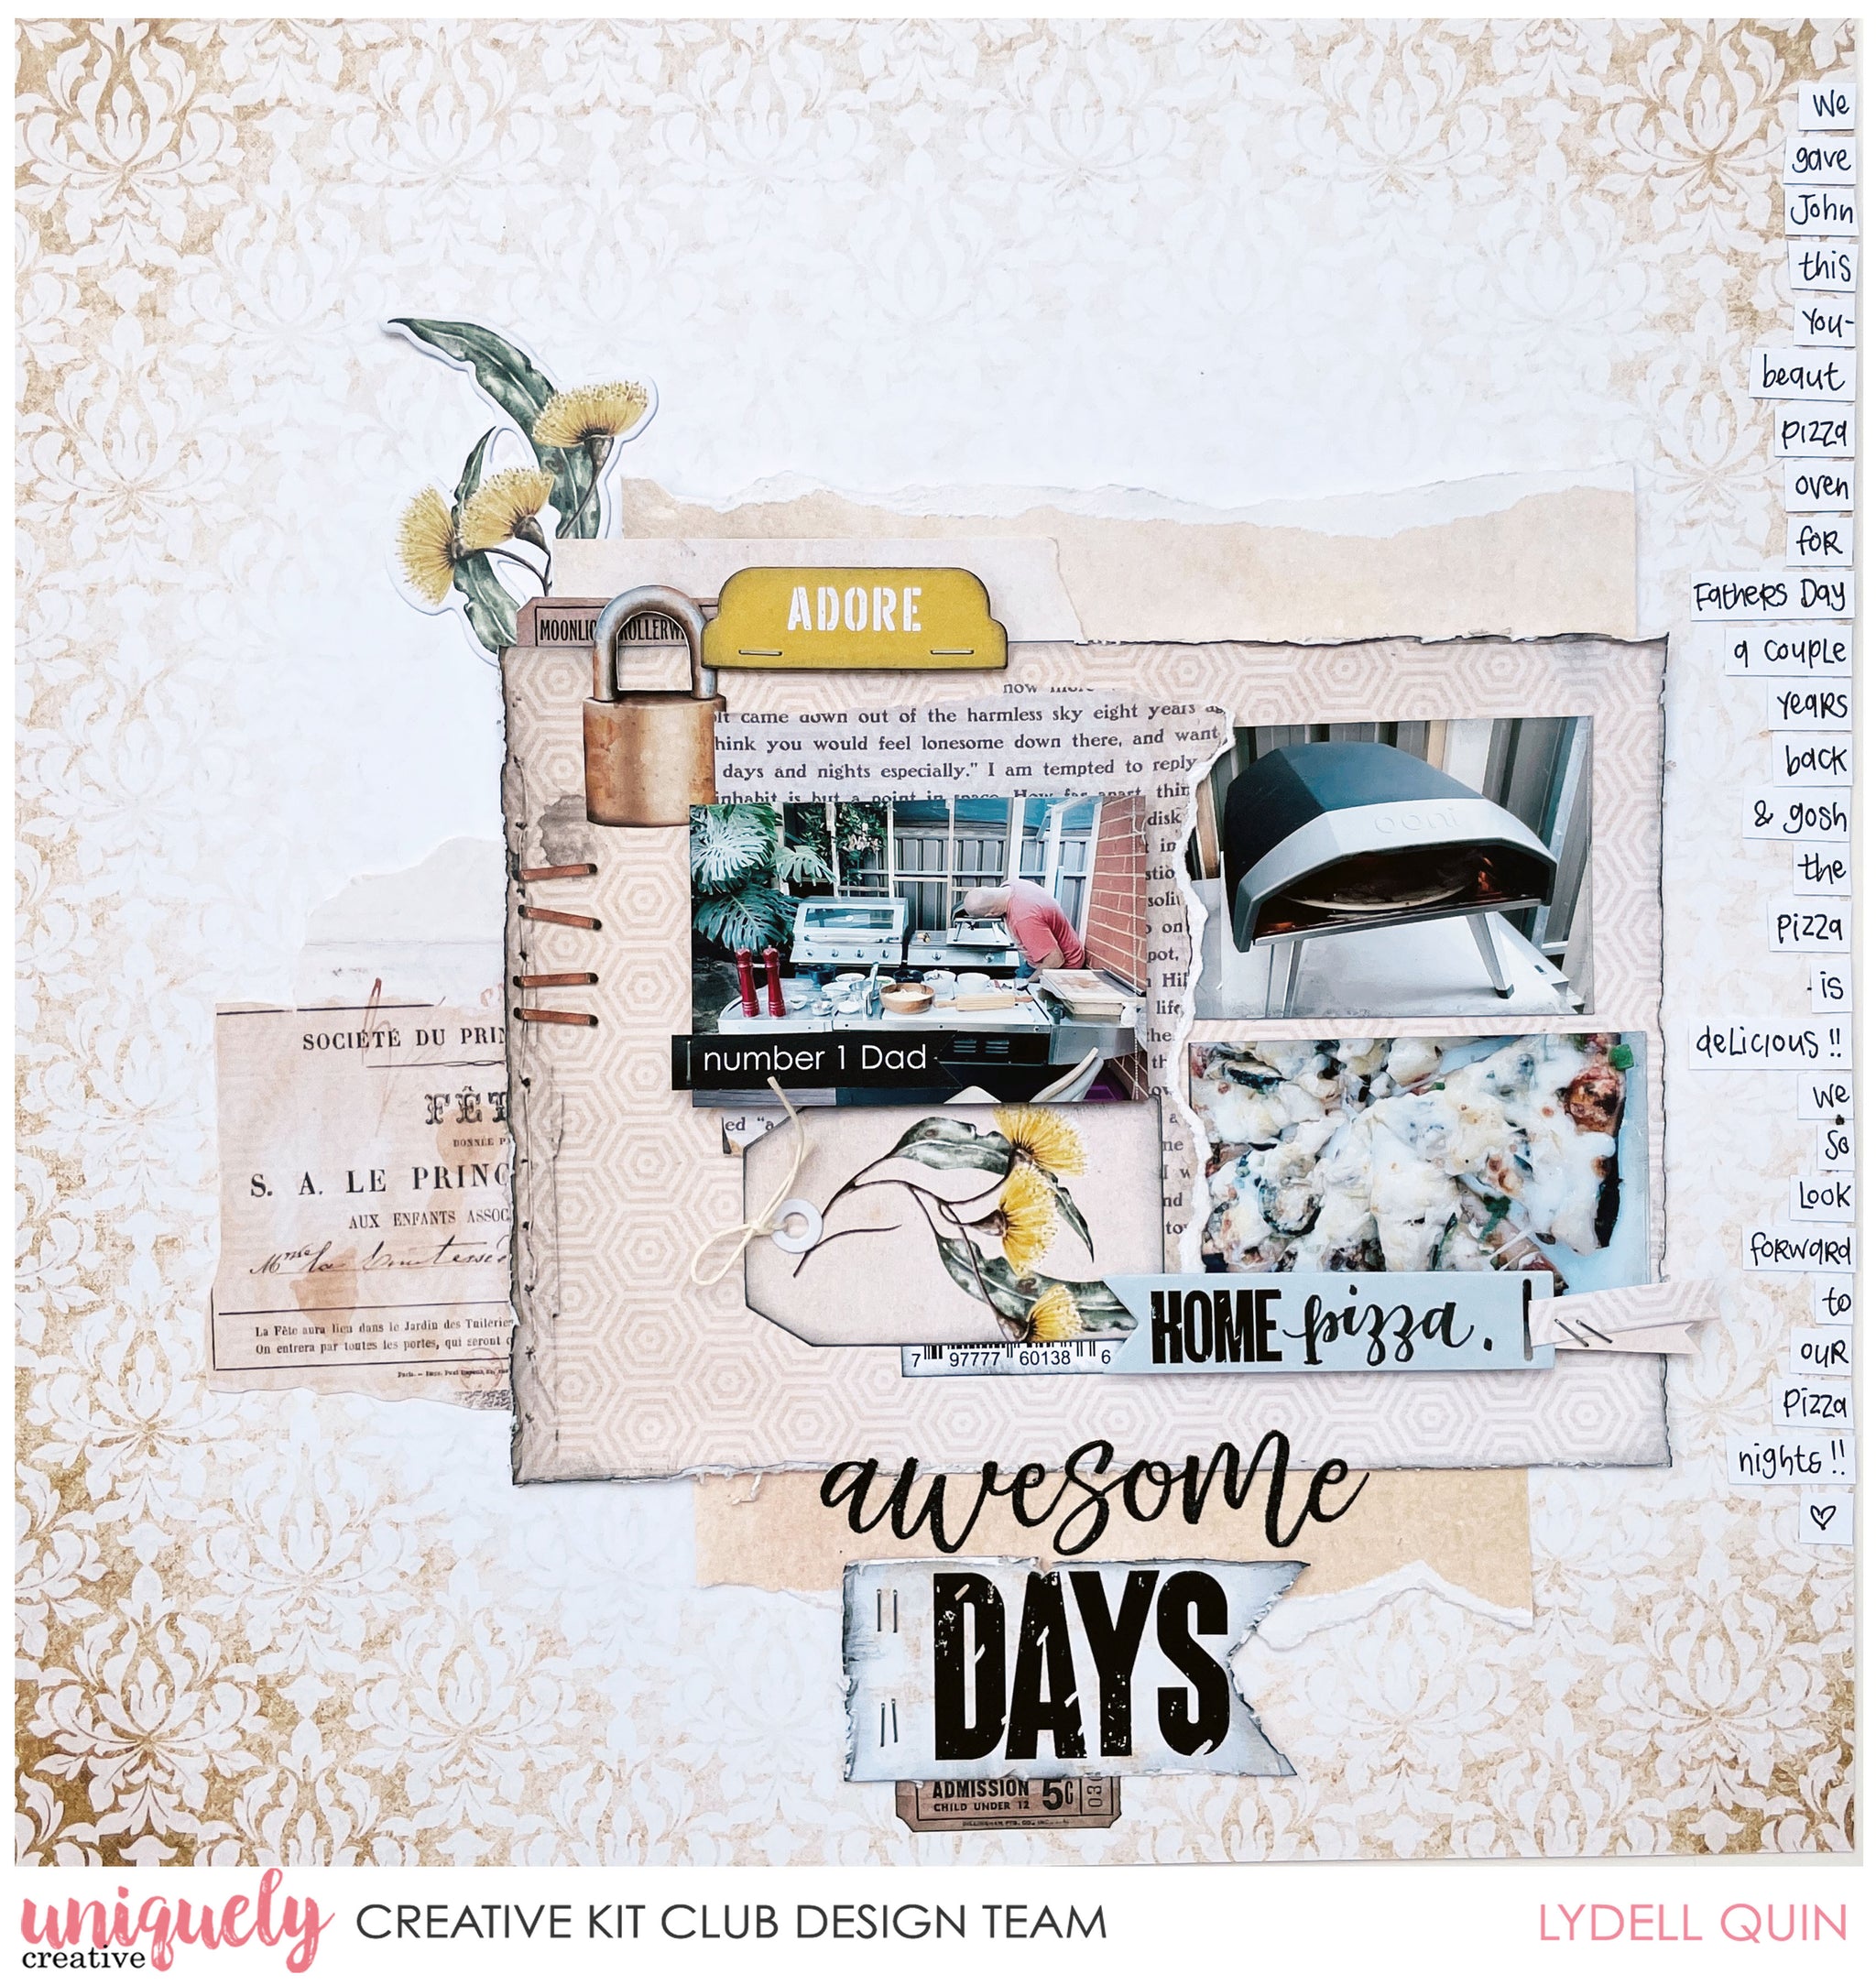 Looking for a Great Scrapbook Album? We've Got You Covered!